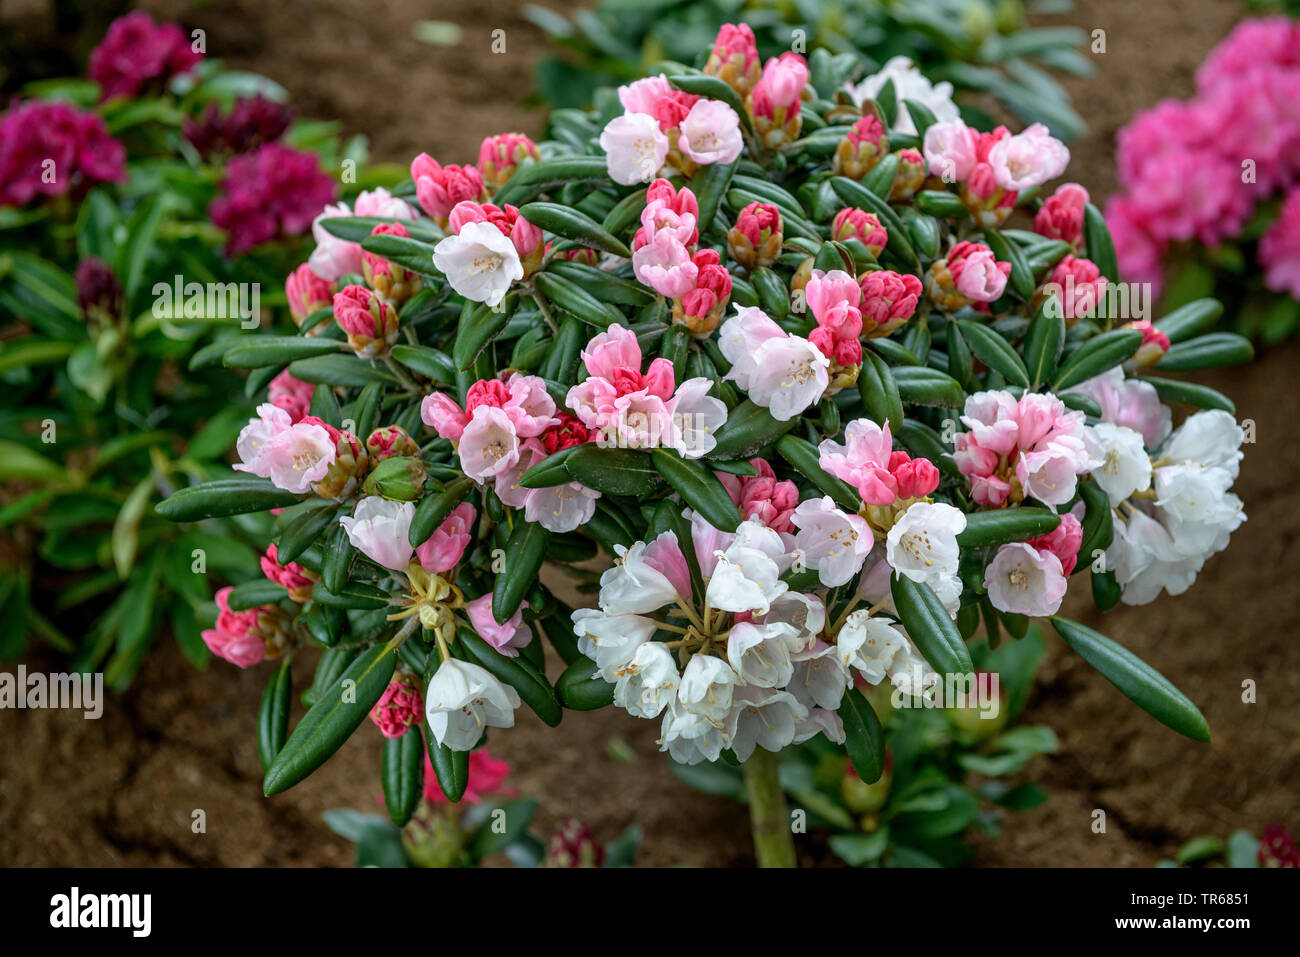 Yakushimanum Rhododendron (Rhododendron 'Koichiro Wada', Rhododendron Koichiro Wada, Rhododendron yakushimanum), blooming, cultivar Koichiro Wada, Germany, Lower Saxony Stock Photo